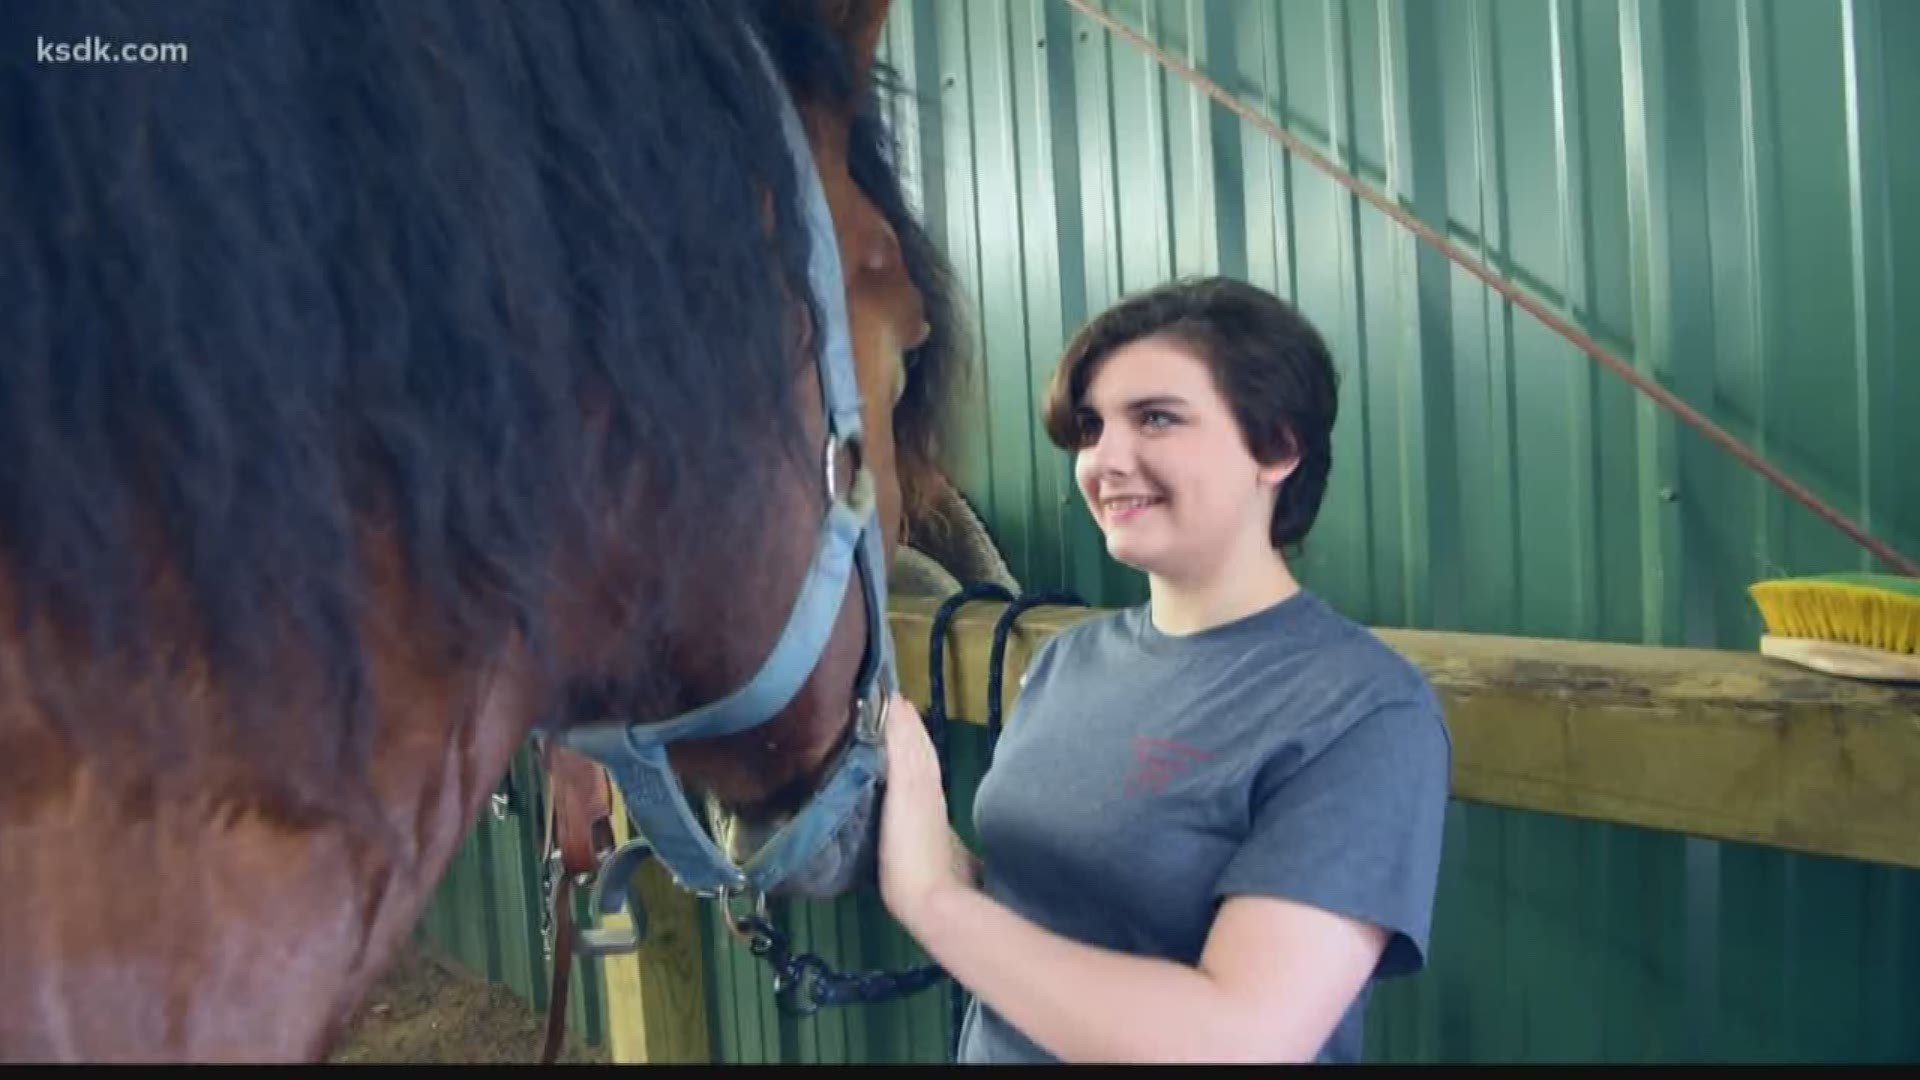 She's a typical teen who loves horseback riding and is looking for her forever family.